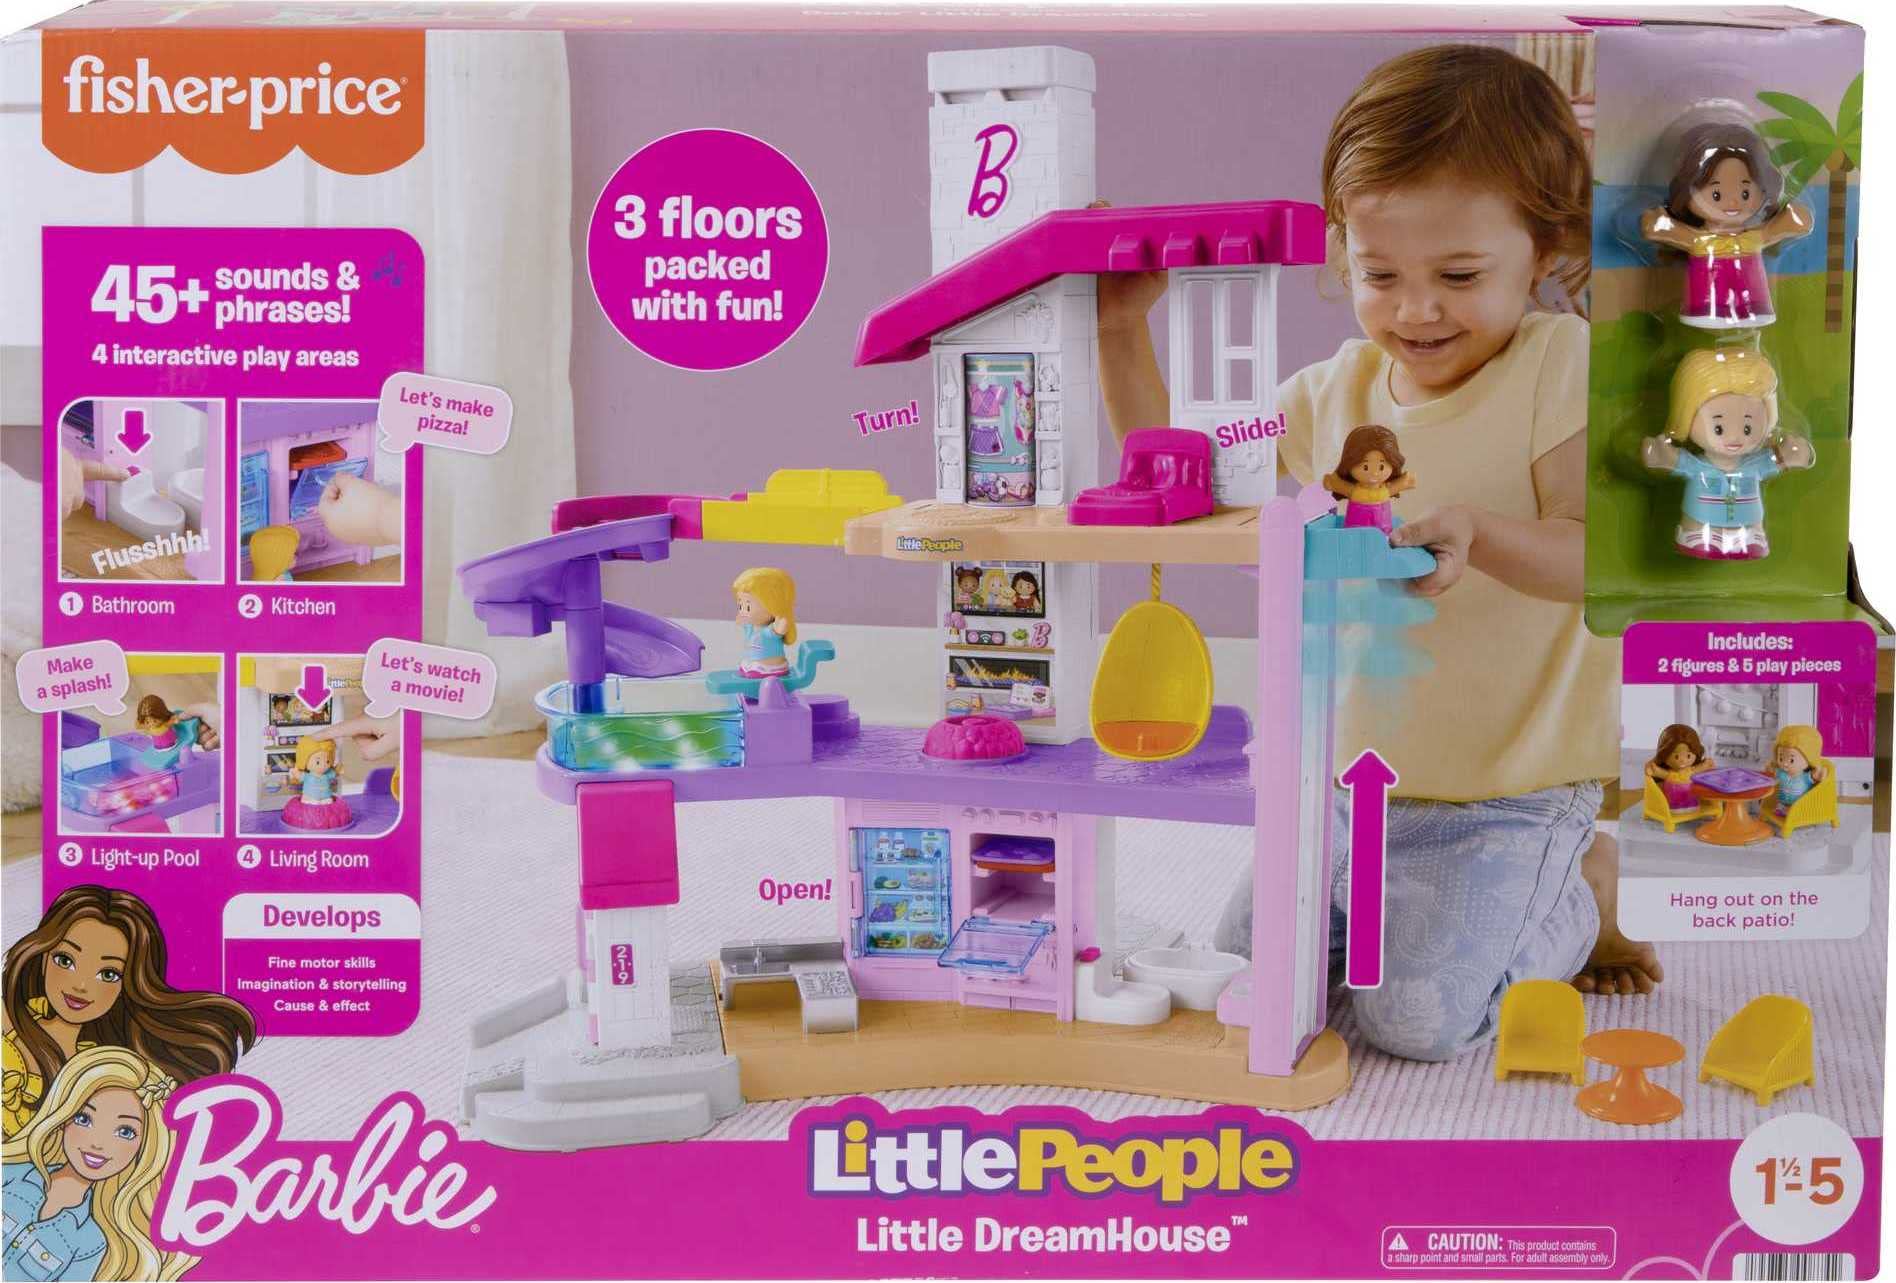 Fisher-Price Little People Barbie Toddler Playset Little Dreamhouse With Music & Lights Plus Figures & Accessories For Ages 18+ Months